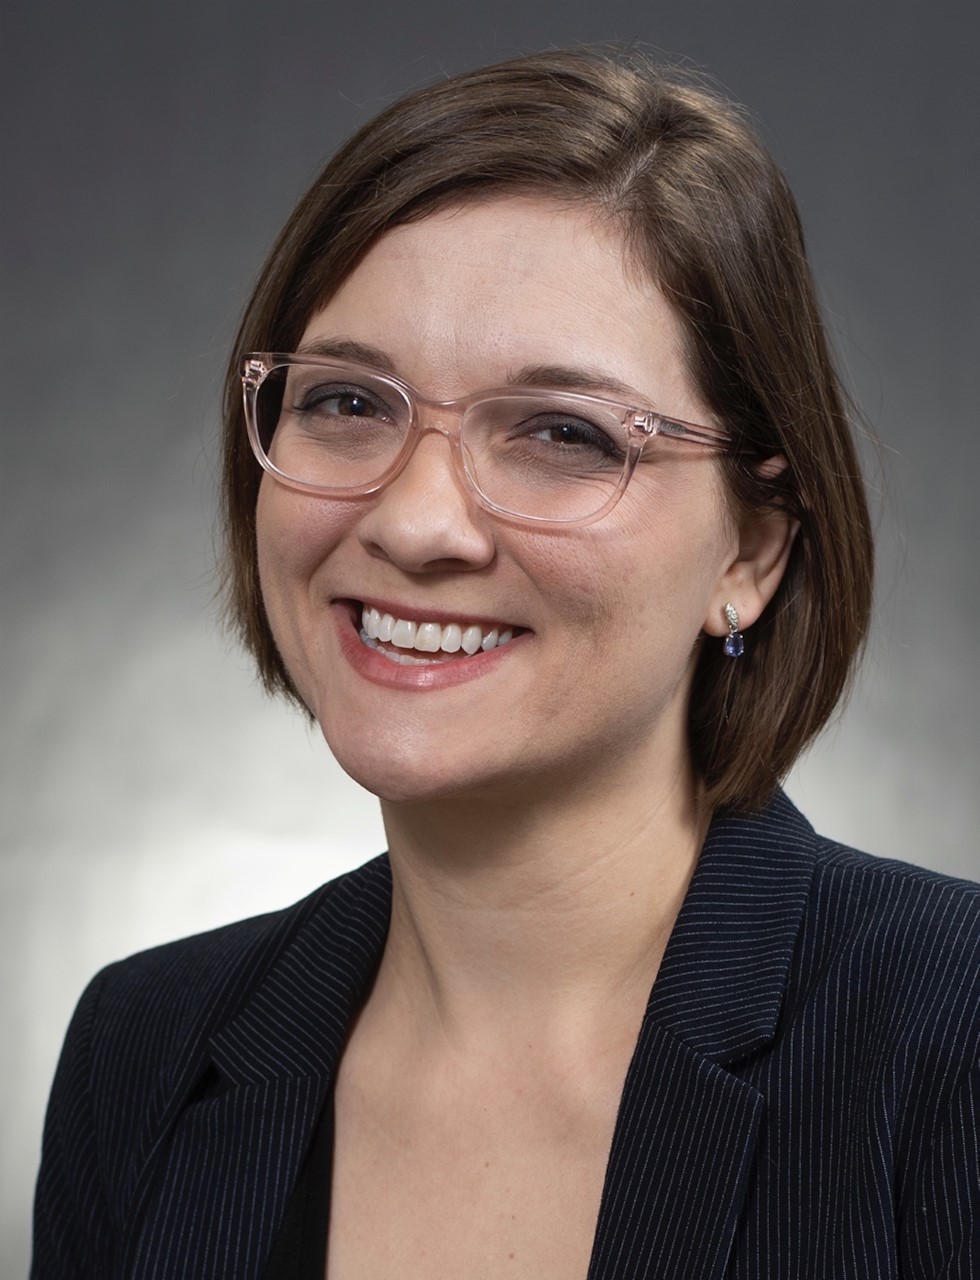 Wendy Clark smiling a the camera in glasses and a black jacket against a background that fades from dark gray on the edges to white in the middle.